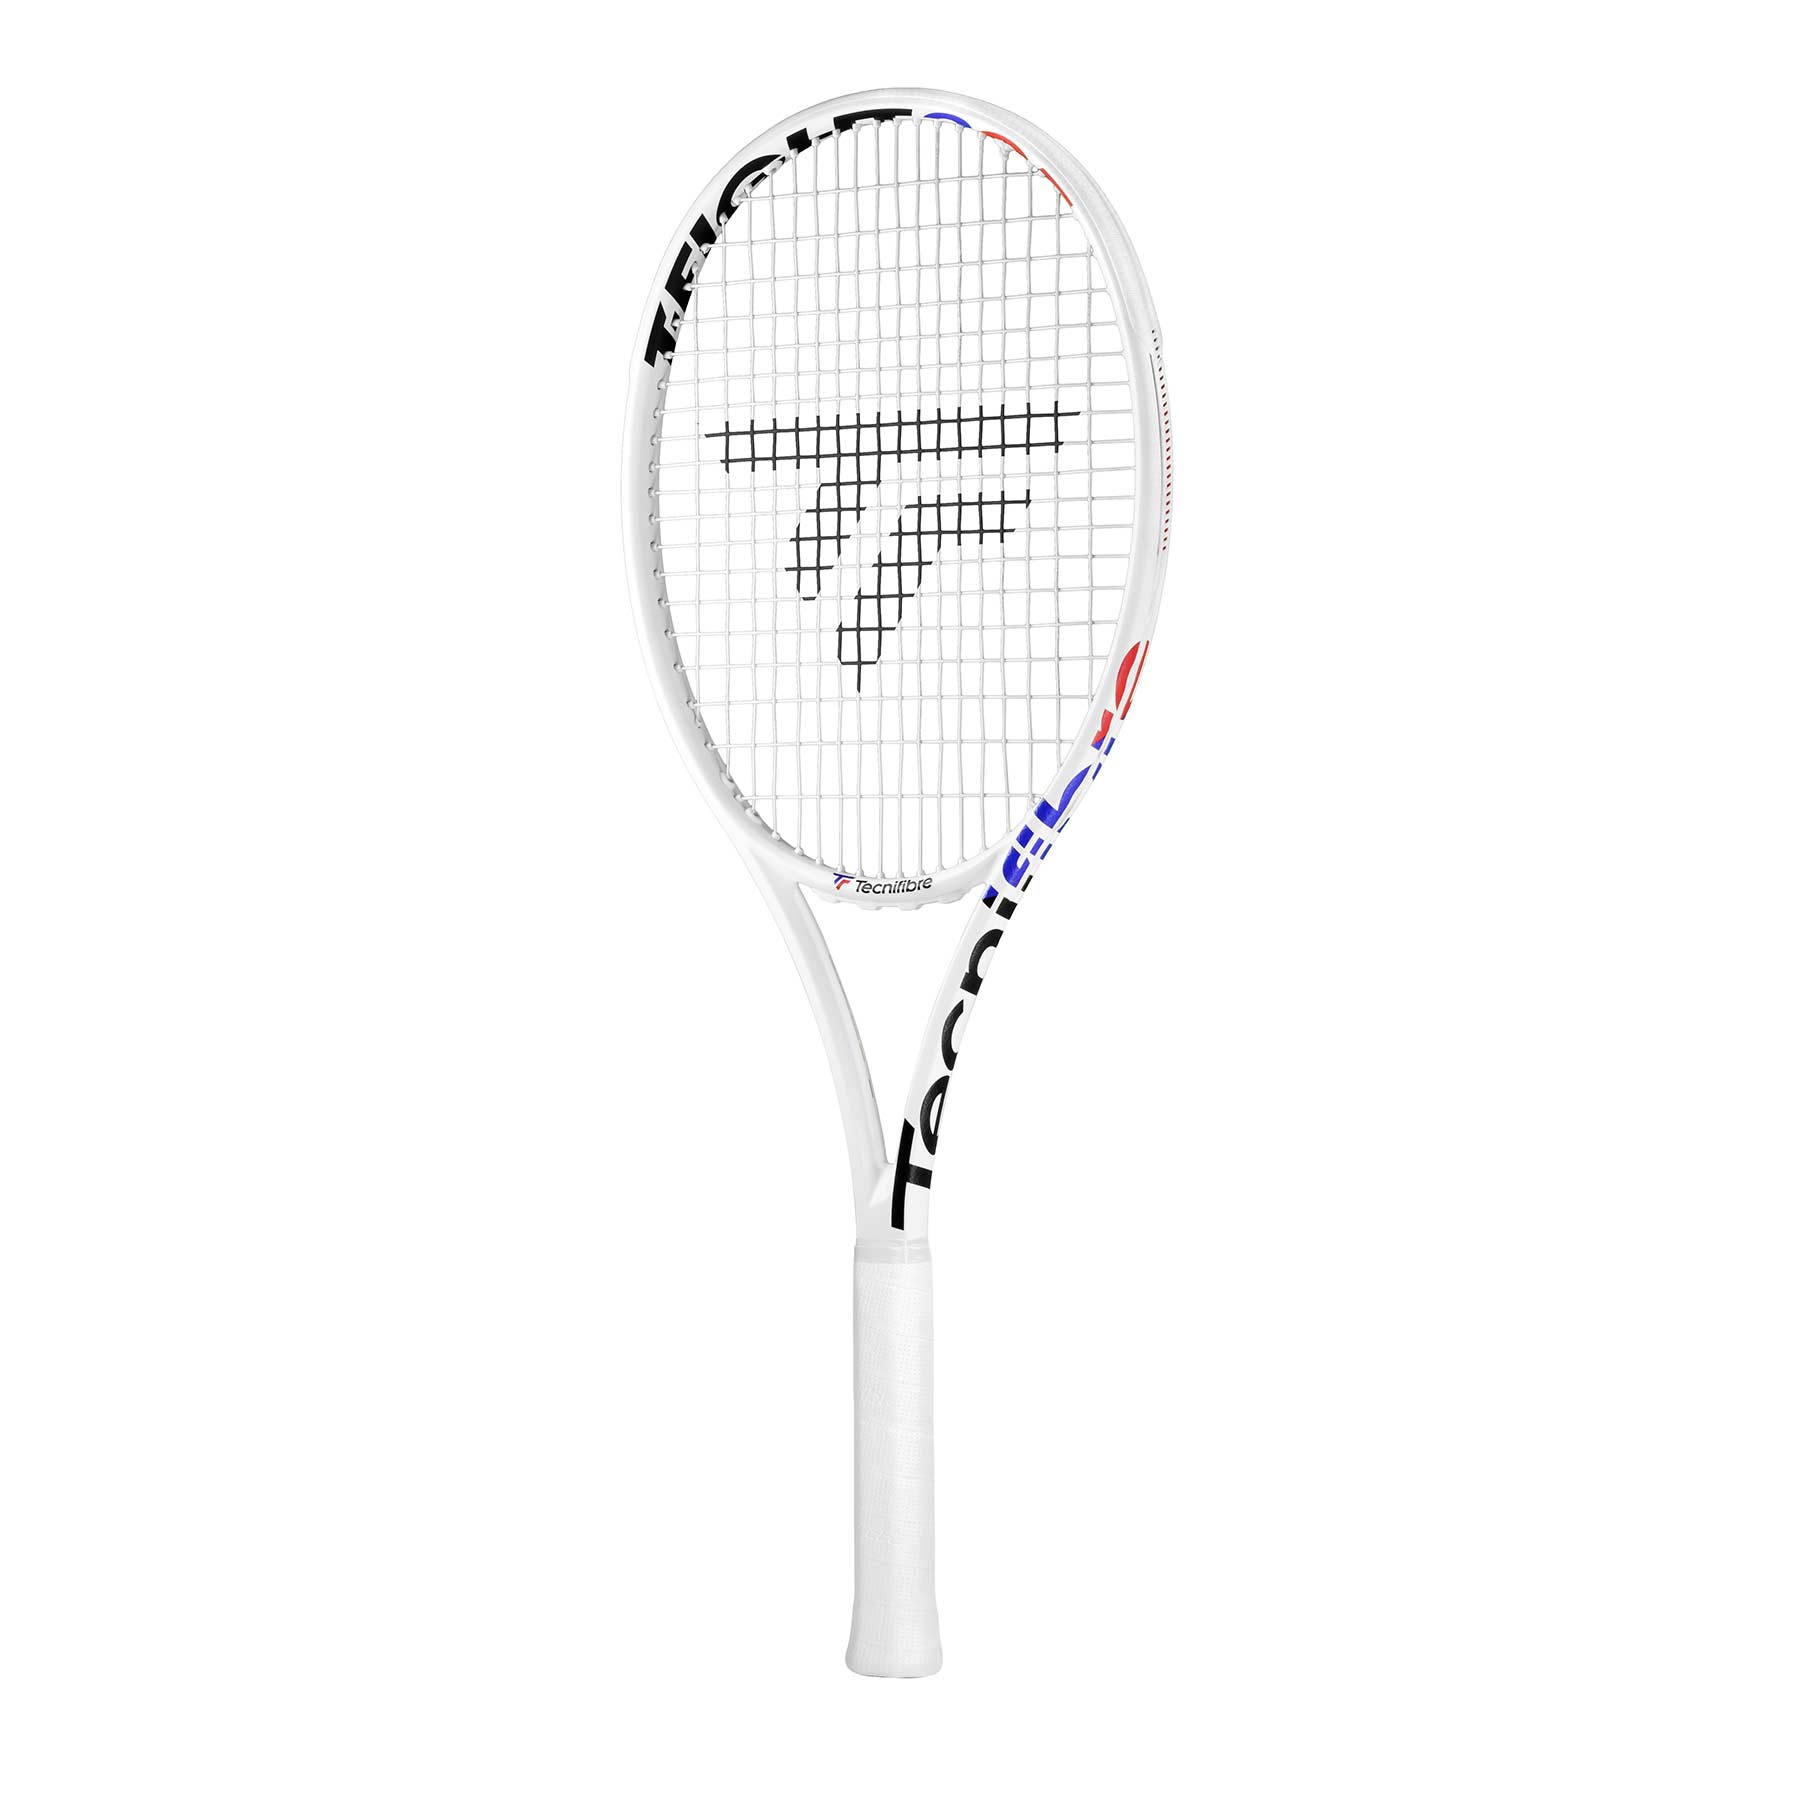 Tecnifibre T-Fight ISO 300 featuring its classy White/Royal/Red colors